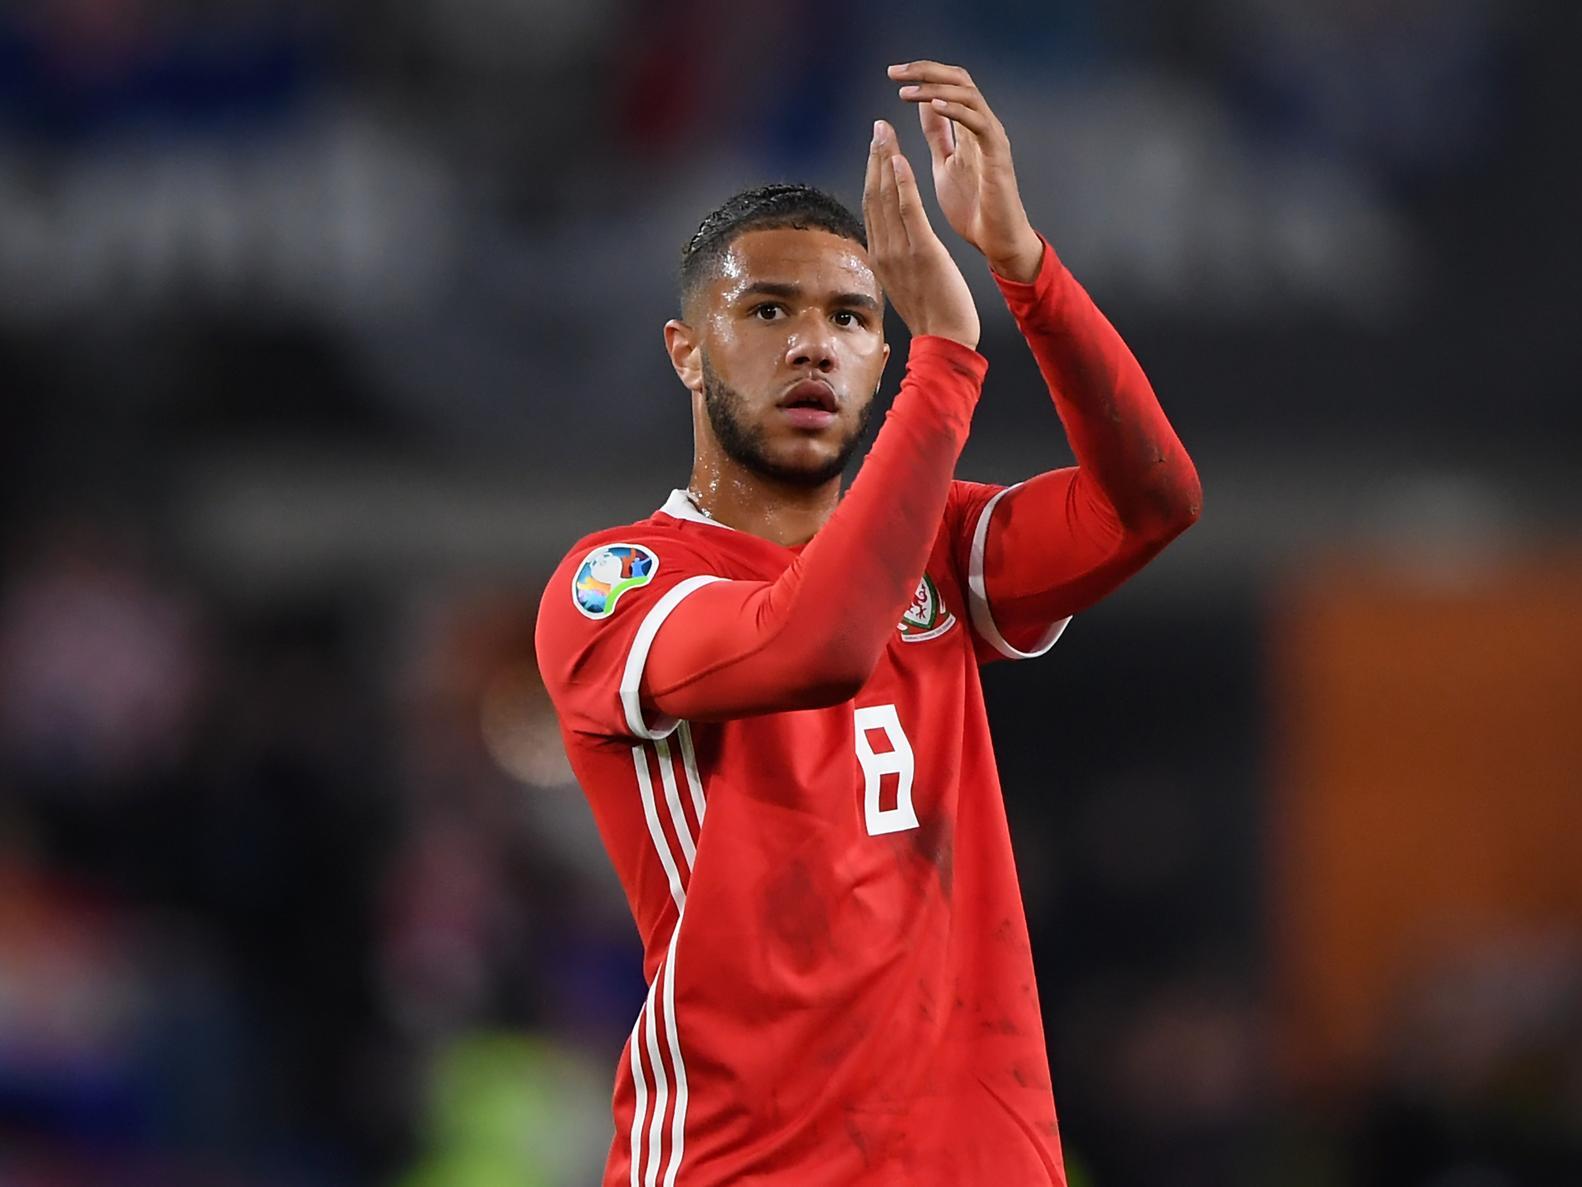 The first of United's remaining big three seniors in action with Roberts and Wales facing Euro 2020 qualifiers away at Azerbaijan on Saturday (5pm) and at home to Hungary on Tuesday (7.45pm). Photo by Alex Davidson/Getty Images